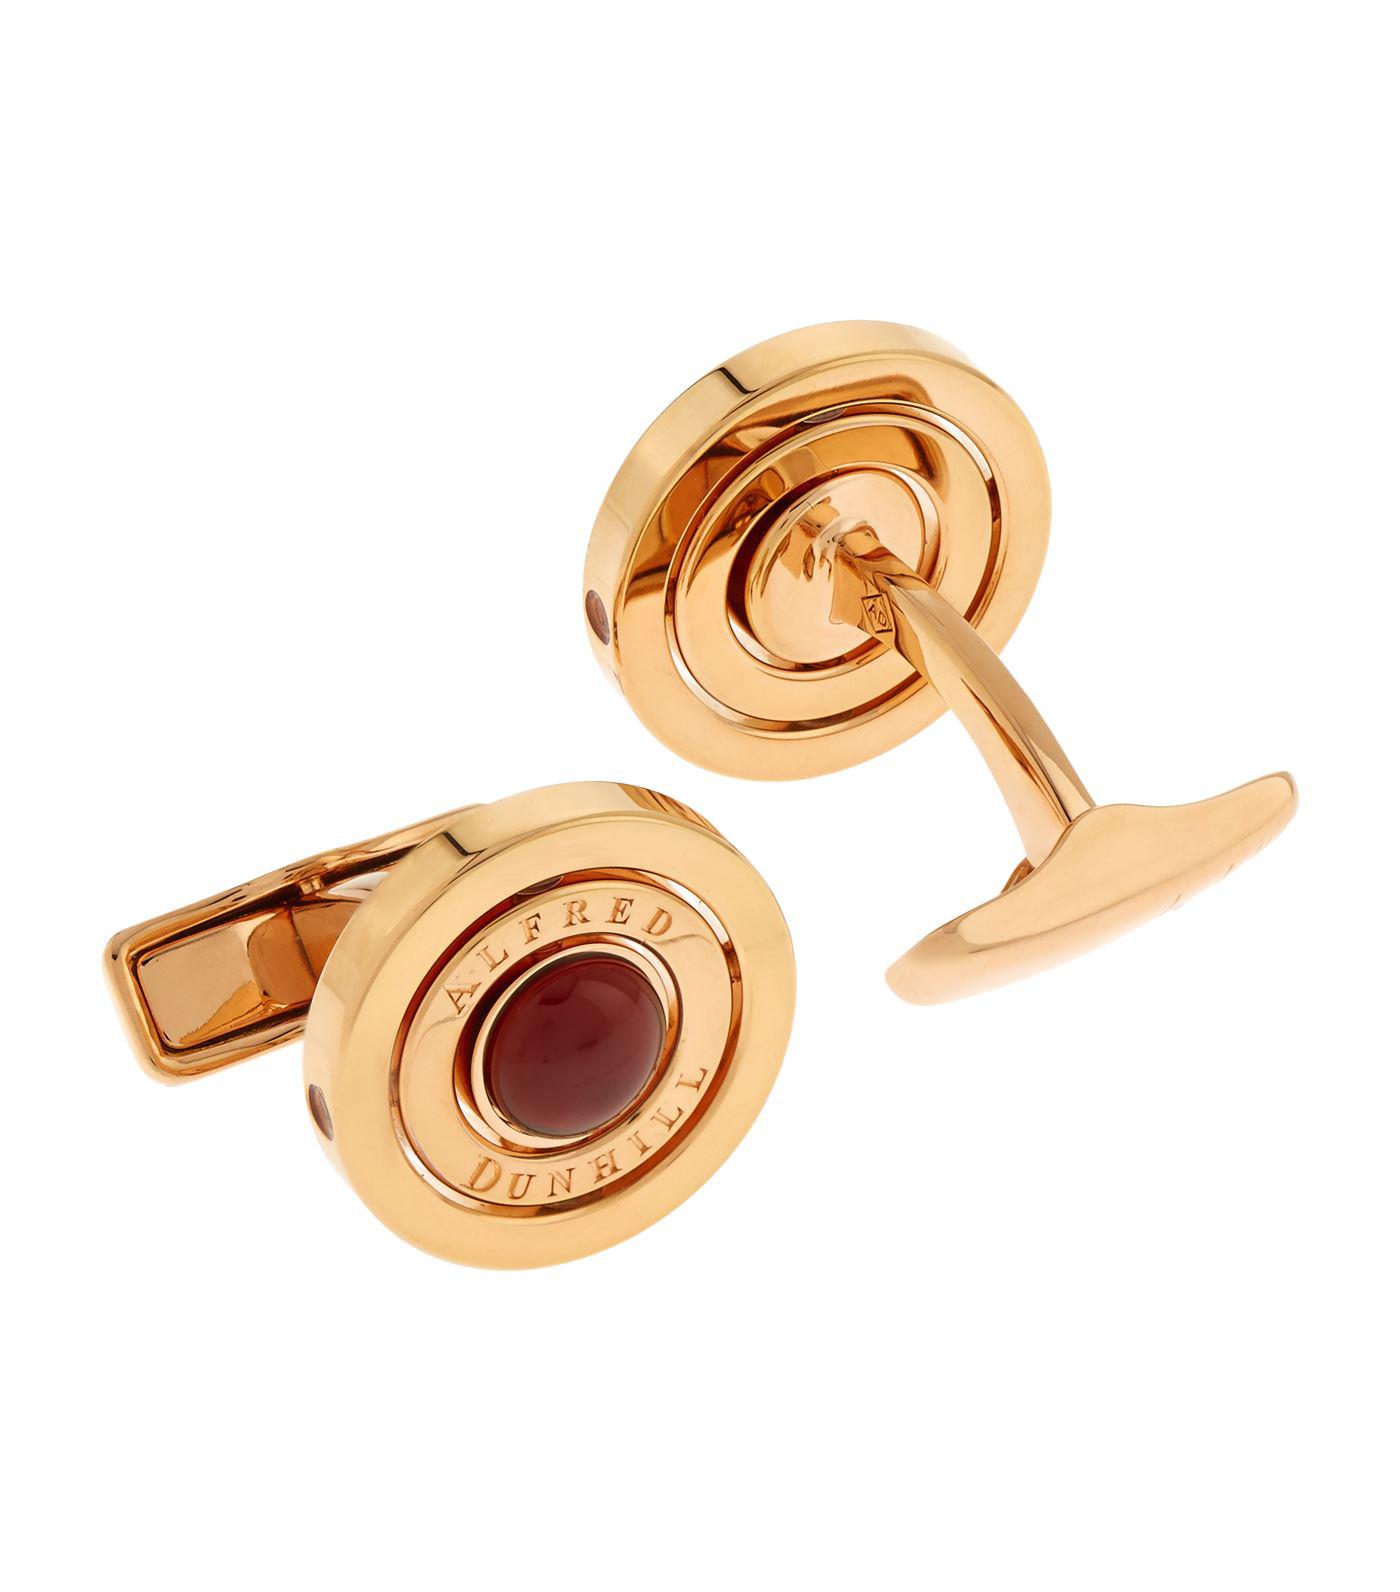 Lyst - Dunhill Rose Gold Ruby Cufflinks in Metallic for Men